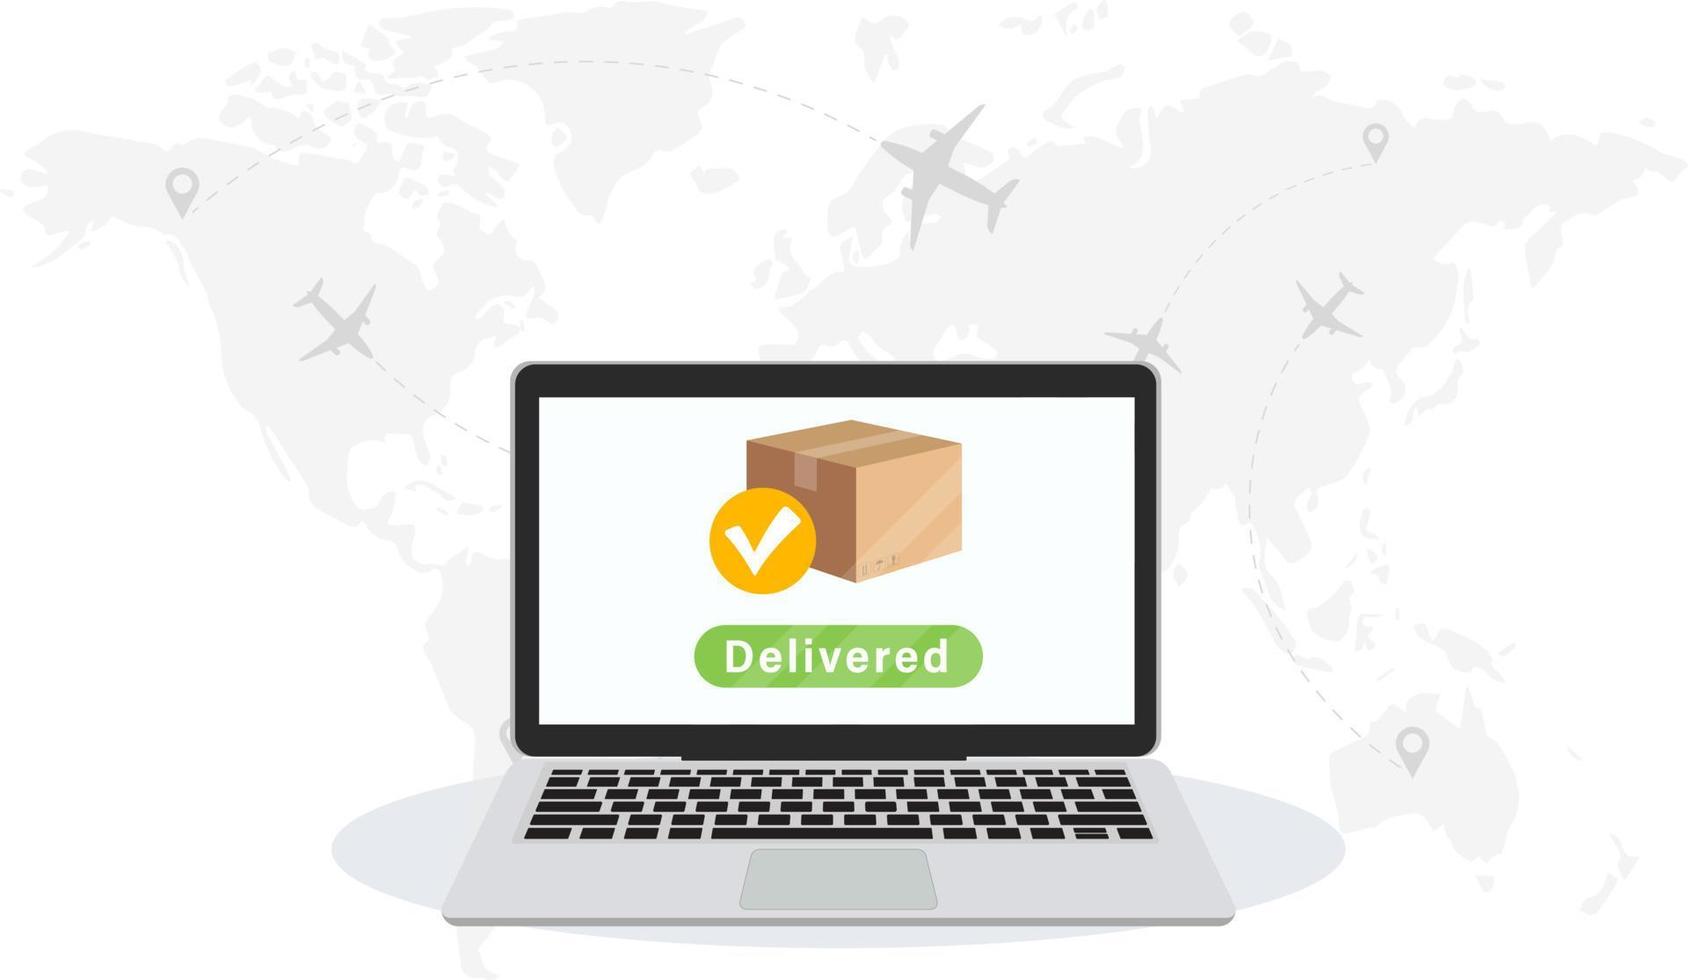 Global logistics network. Notification of the receipt of delivery on the laptop screen. Worldwide shipping by air. World map with cargo moving. vector